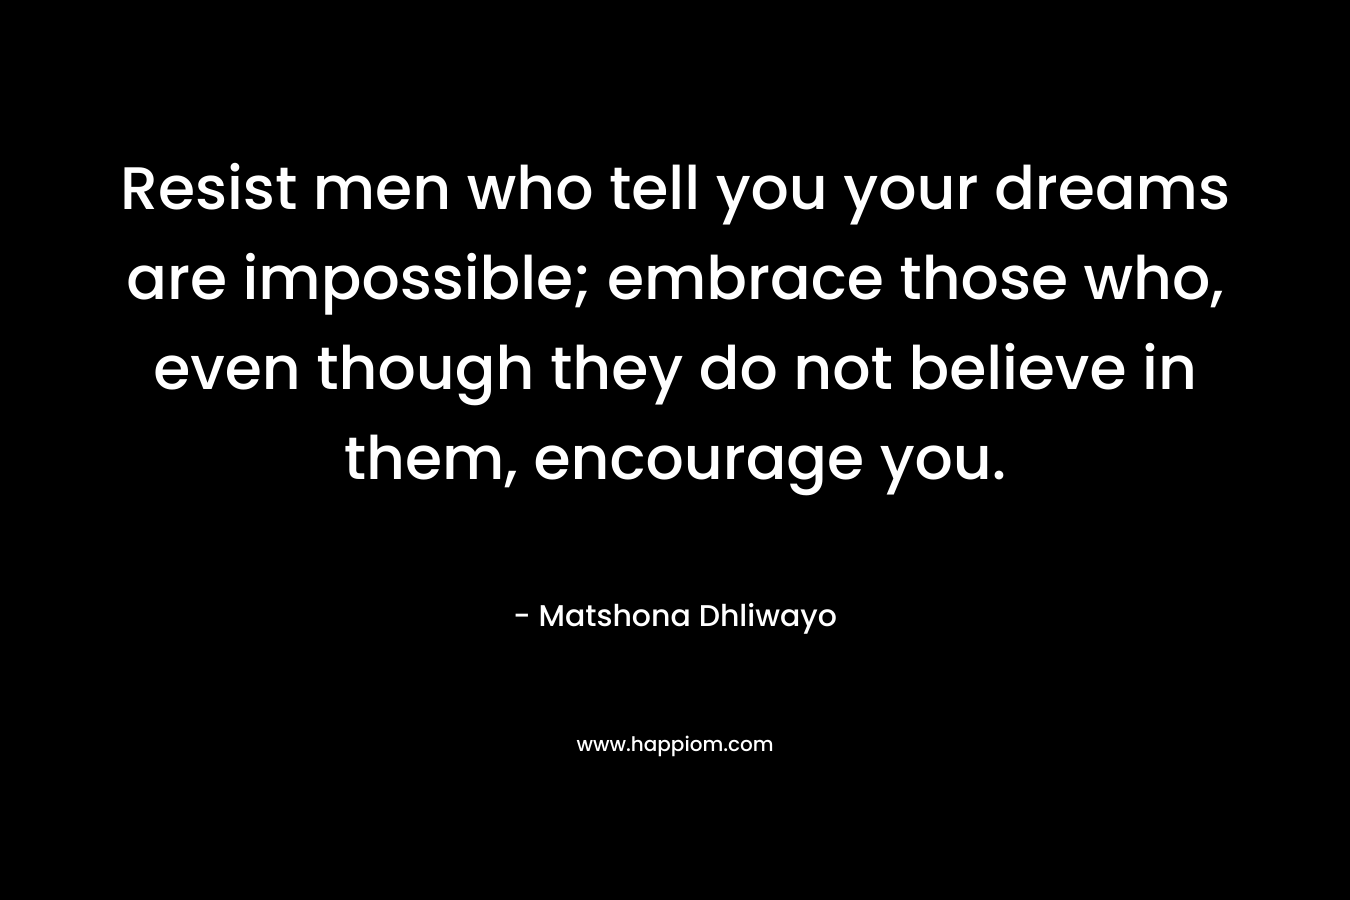 Resist men who tell you your dreams are impossible; embrace those who, even though they do not believe in them, encourage you.